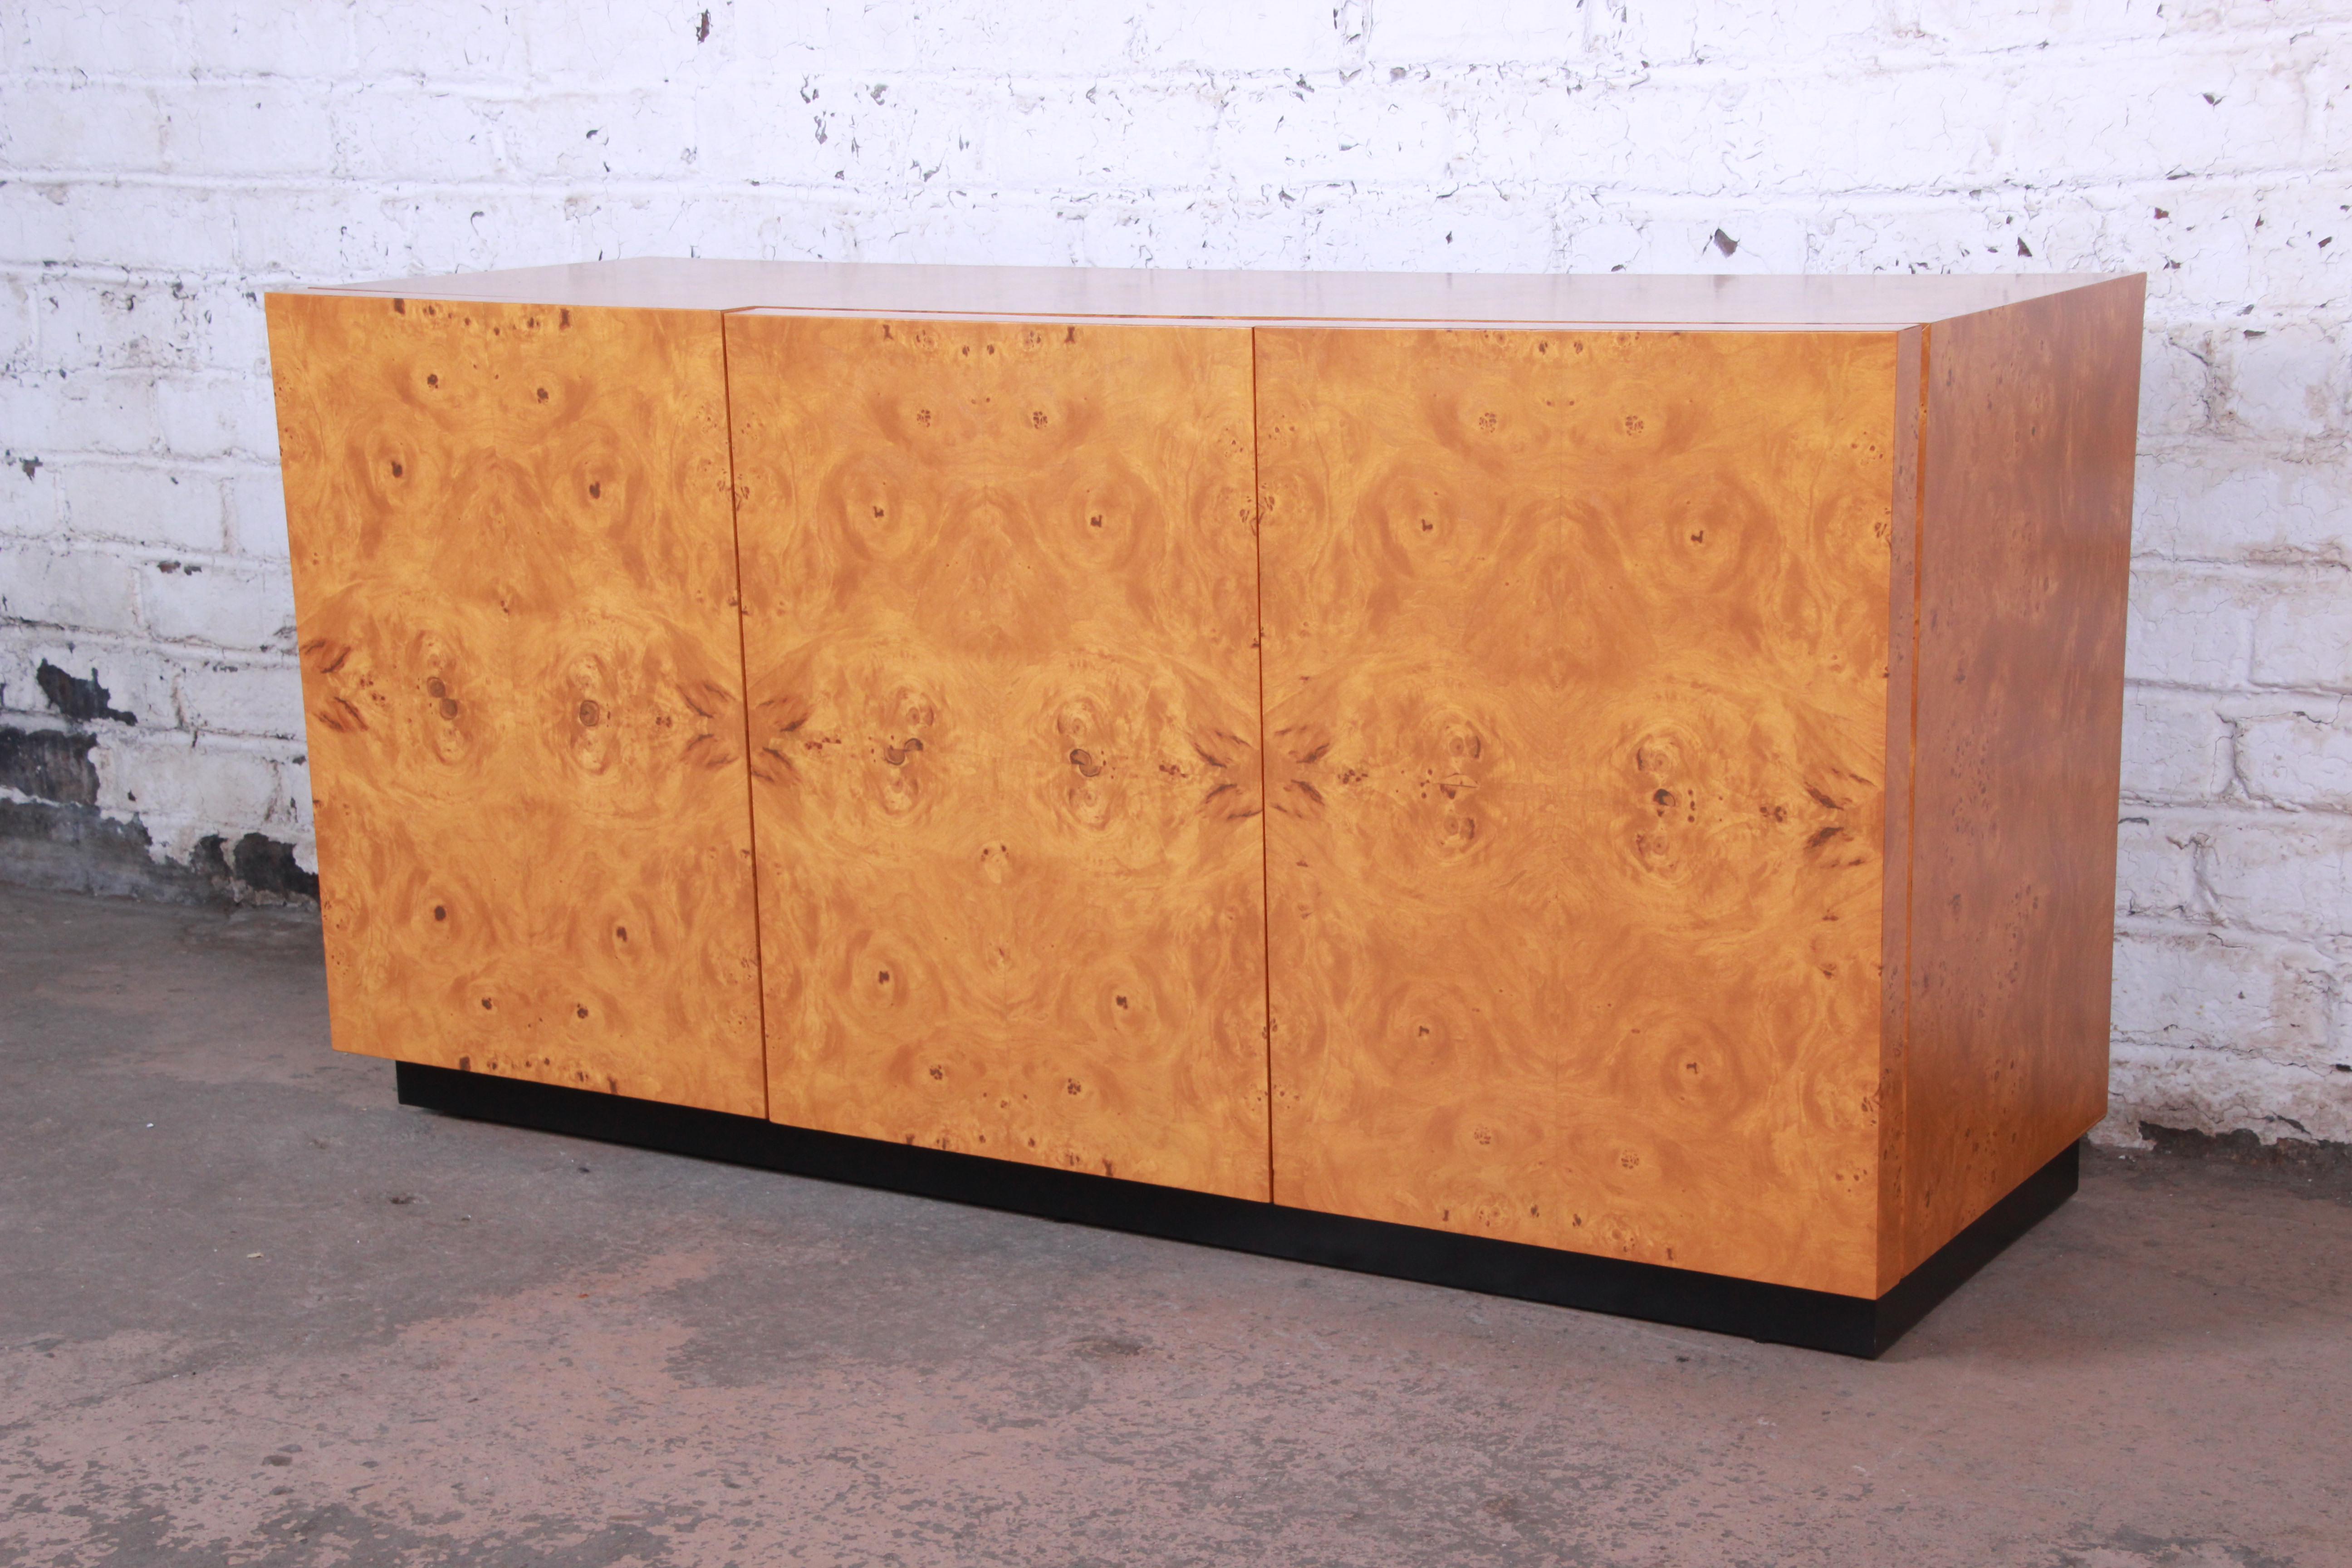 An exceptional Mid-Century Modern burled olive wood credenza or sideboard designed by Milo Baughman. The credenza features gorgeous burled wood grain, a nice black plinth base, and sleek midcentury design. It offers ample room for storage, with two